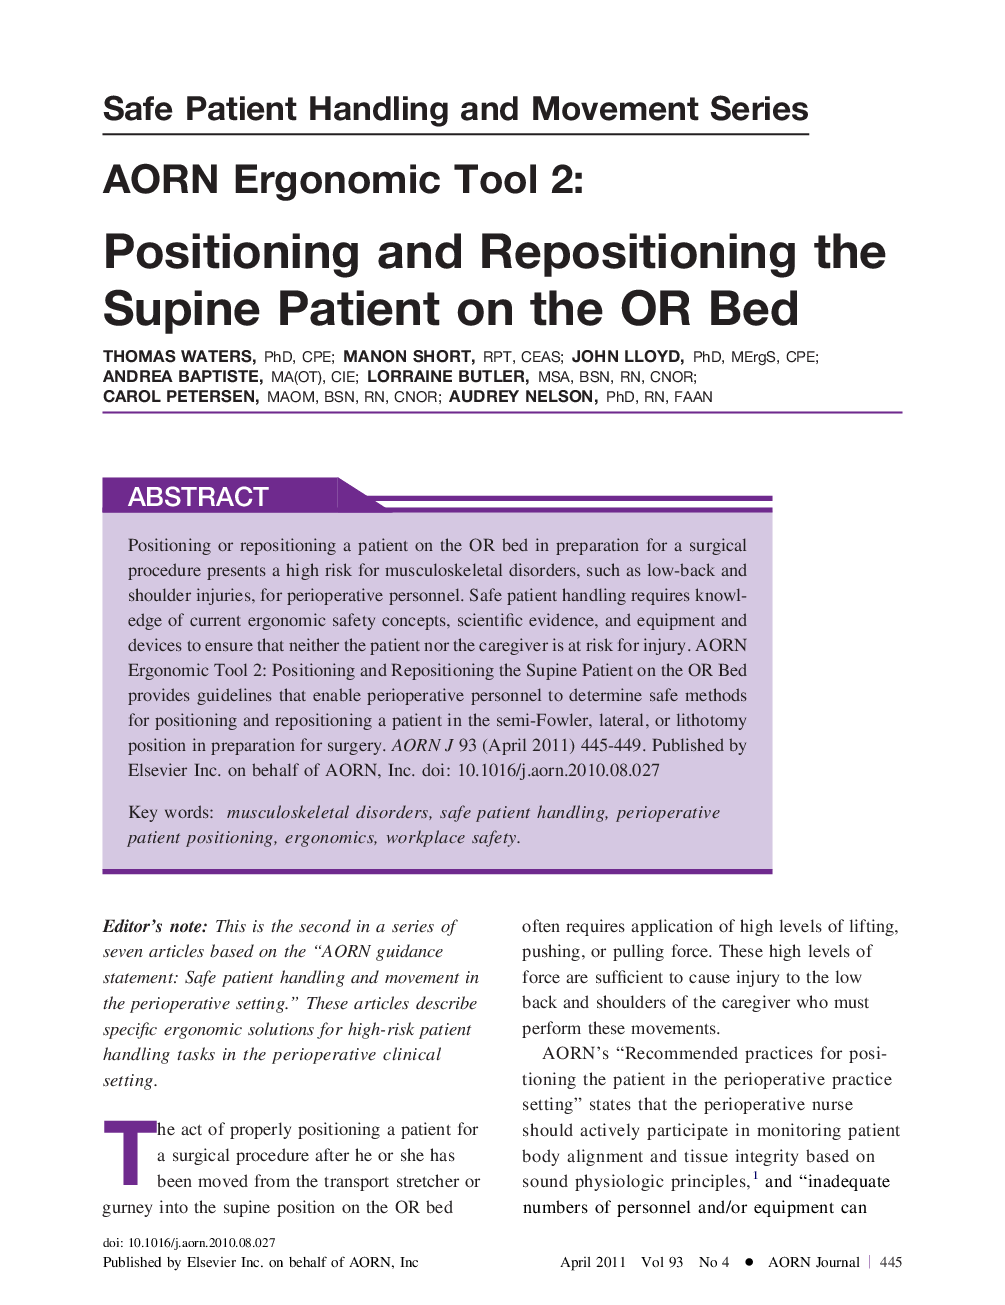 AORN Ergonomic Tool 2: Positioning and Repositioning the Supine Patient on the OR Bed